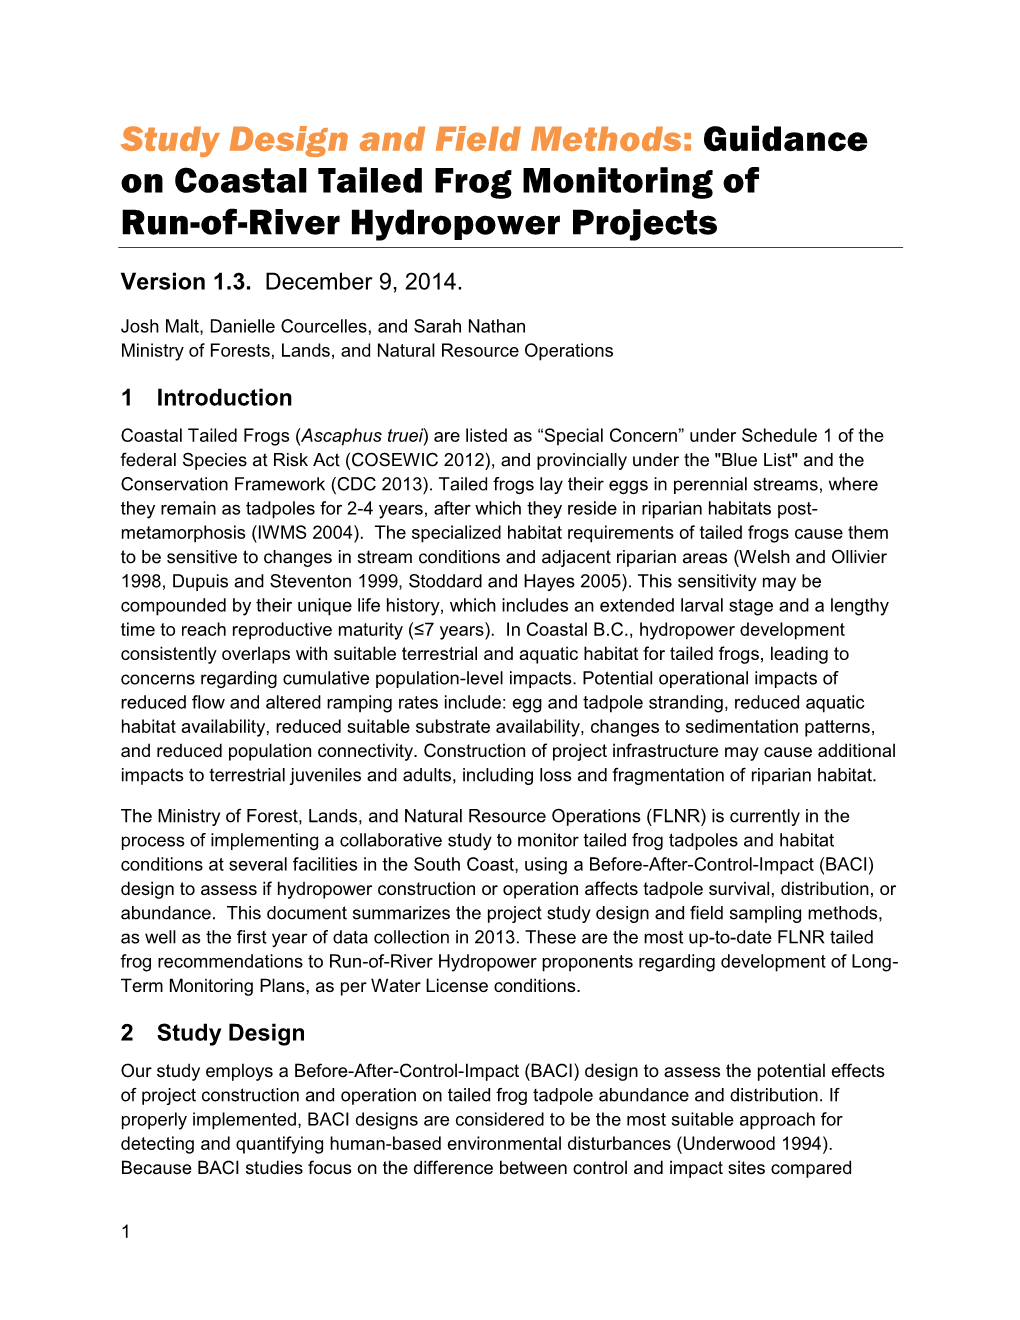 Study Design and Field Methods: Guidance on Coastal Tailed Frog Monitoring of Run-Of-River Hydropower Projects